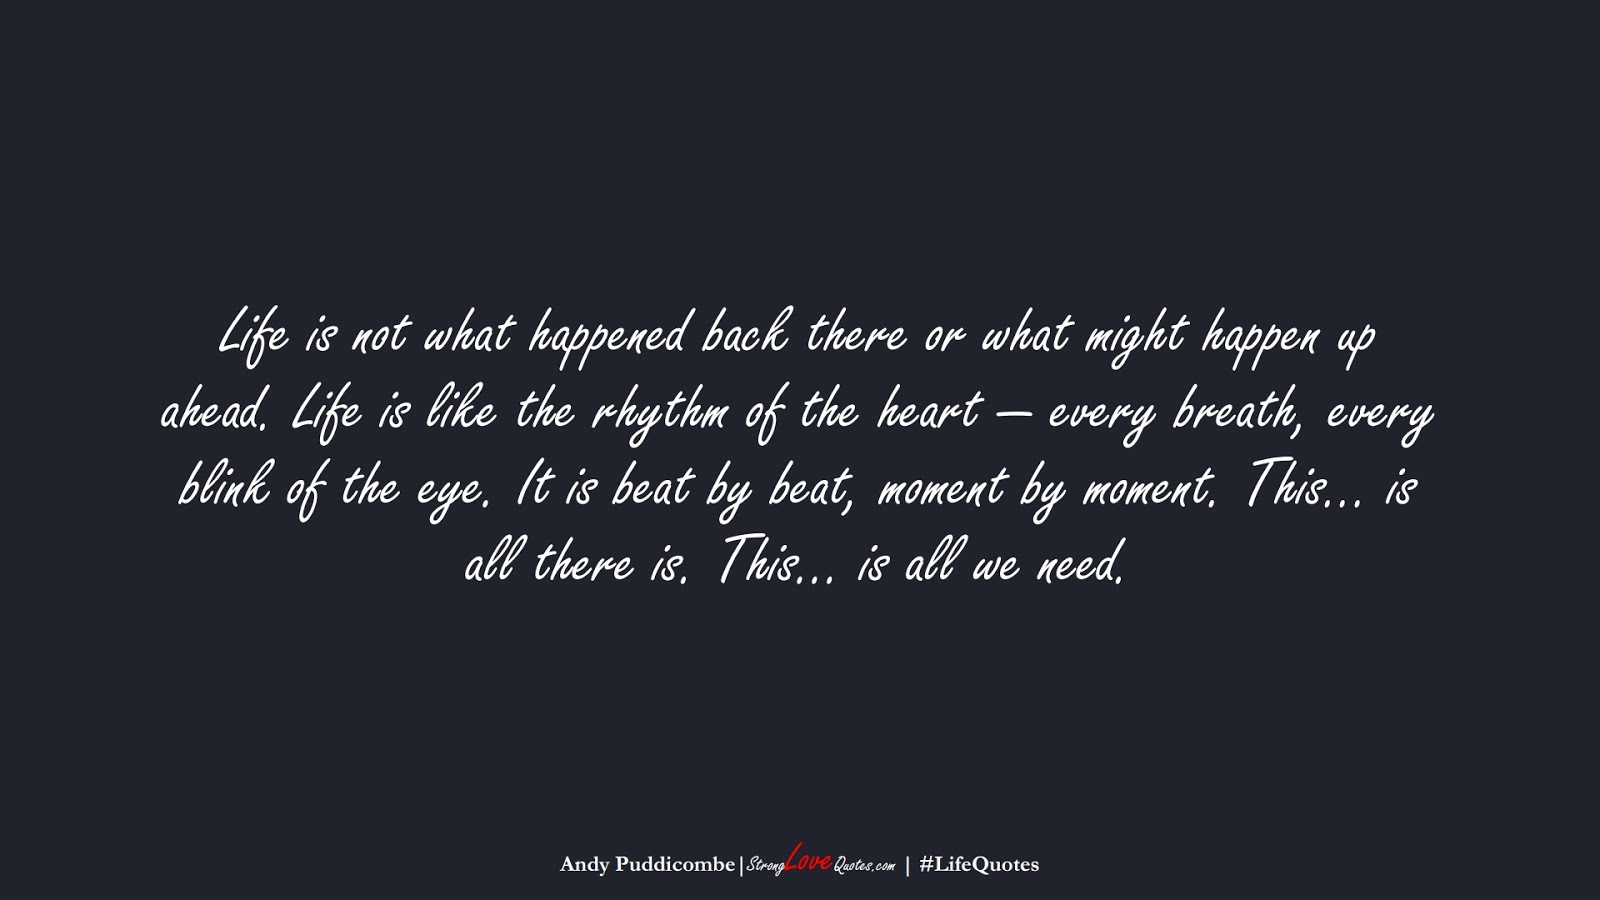 Life is not what happened back there or what might happen up ahead. Life is like the rhythm of the heart — every breath, every blink of the eye. It is beat by beat, moment by moment. This… is all there is. This… is all we need. (Andy Puddicombe);  #LifeQuotes